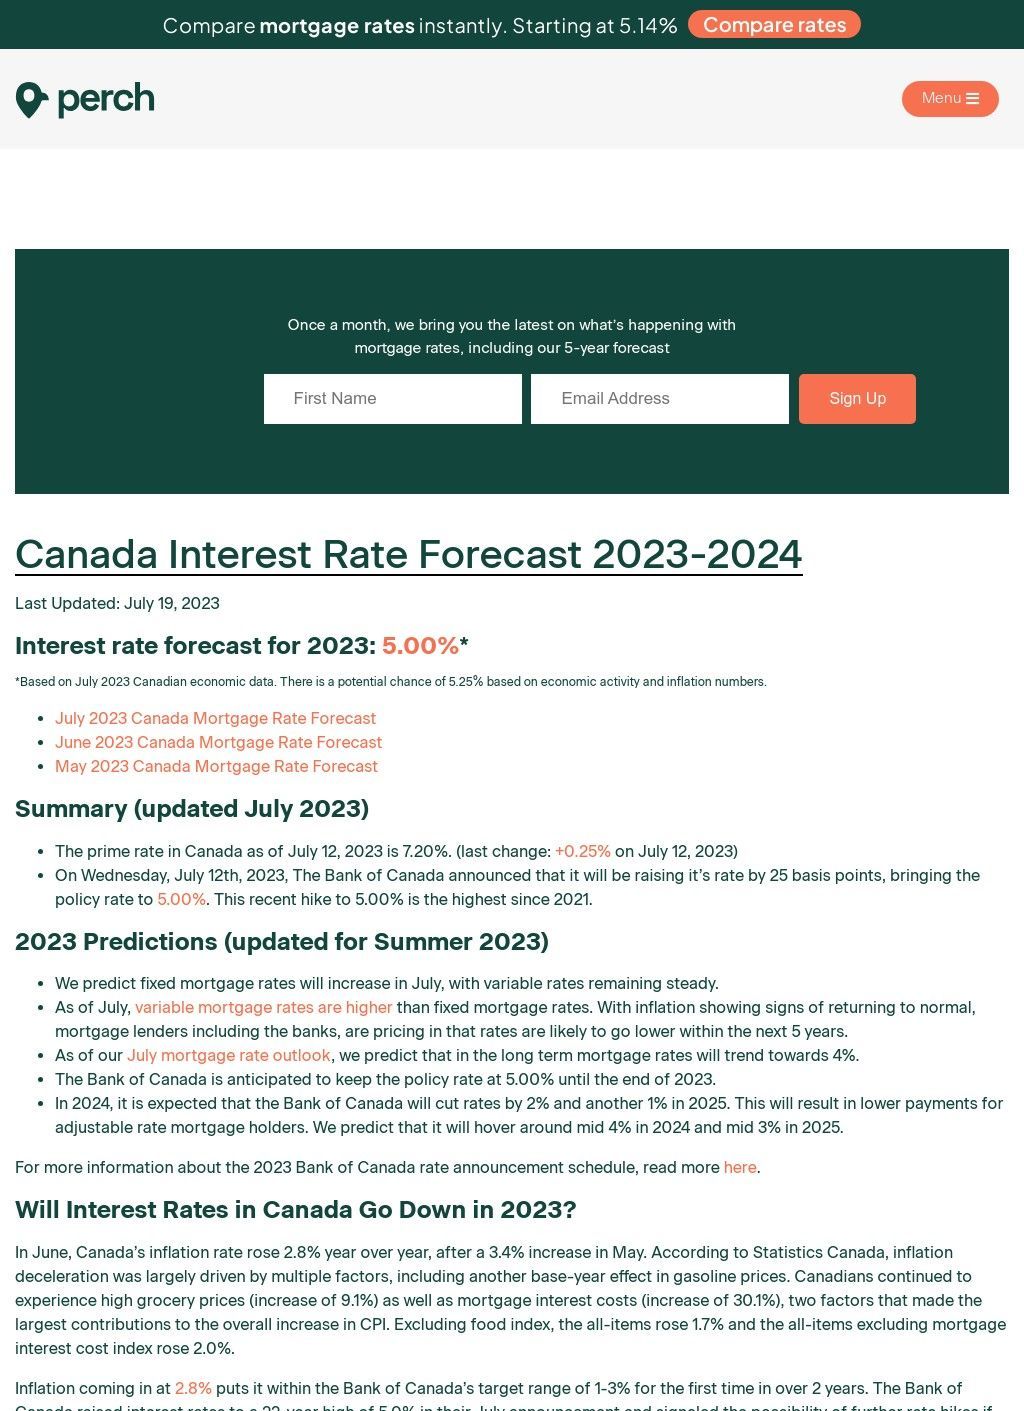 Canada Interest Rate Forecast 2023-2024​